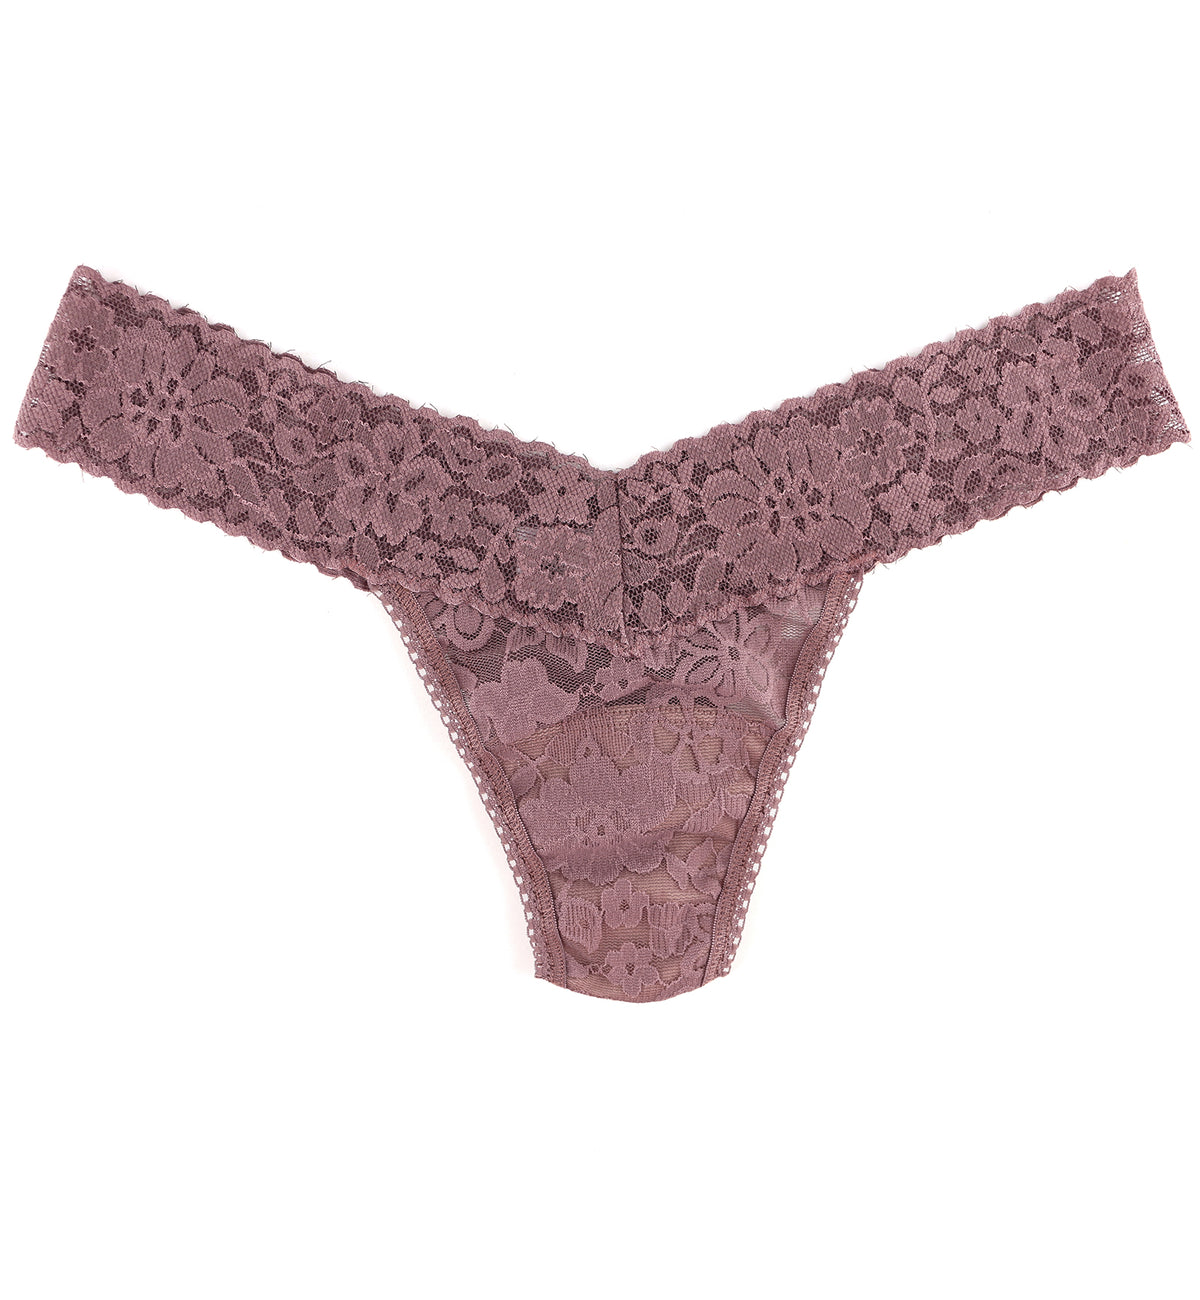 Hanky Panky Daily Lace Low Rise Thong (771001P),All Spice - All Spice,One Size